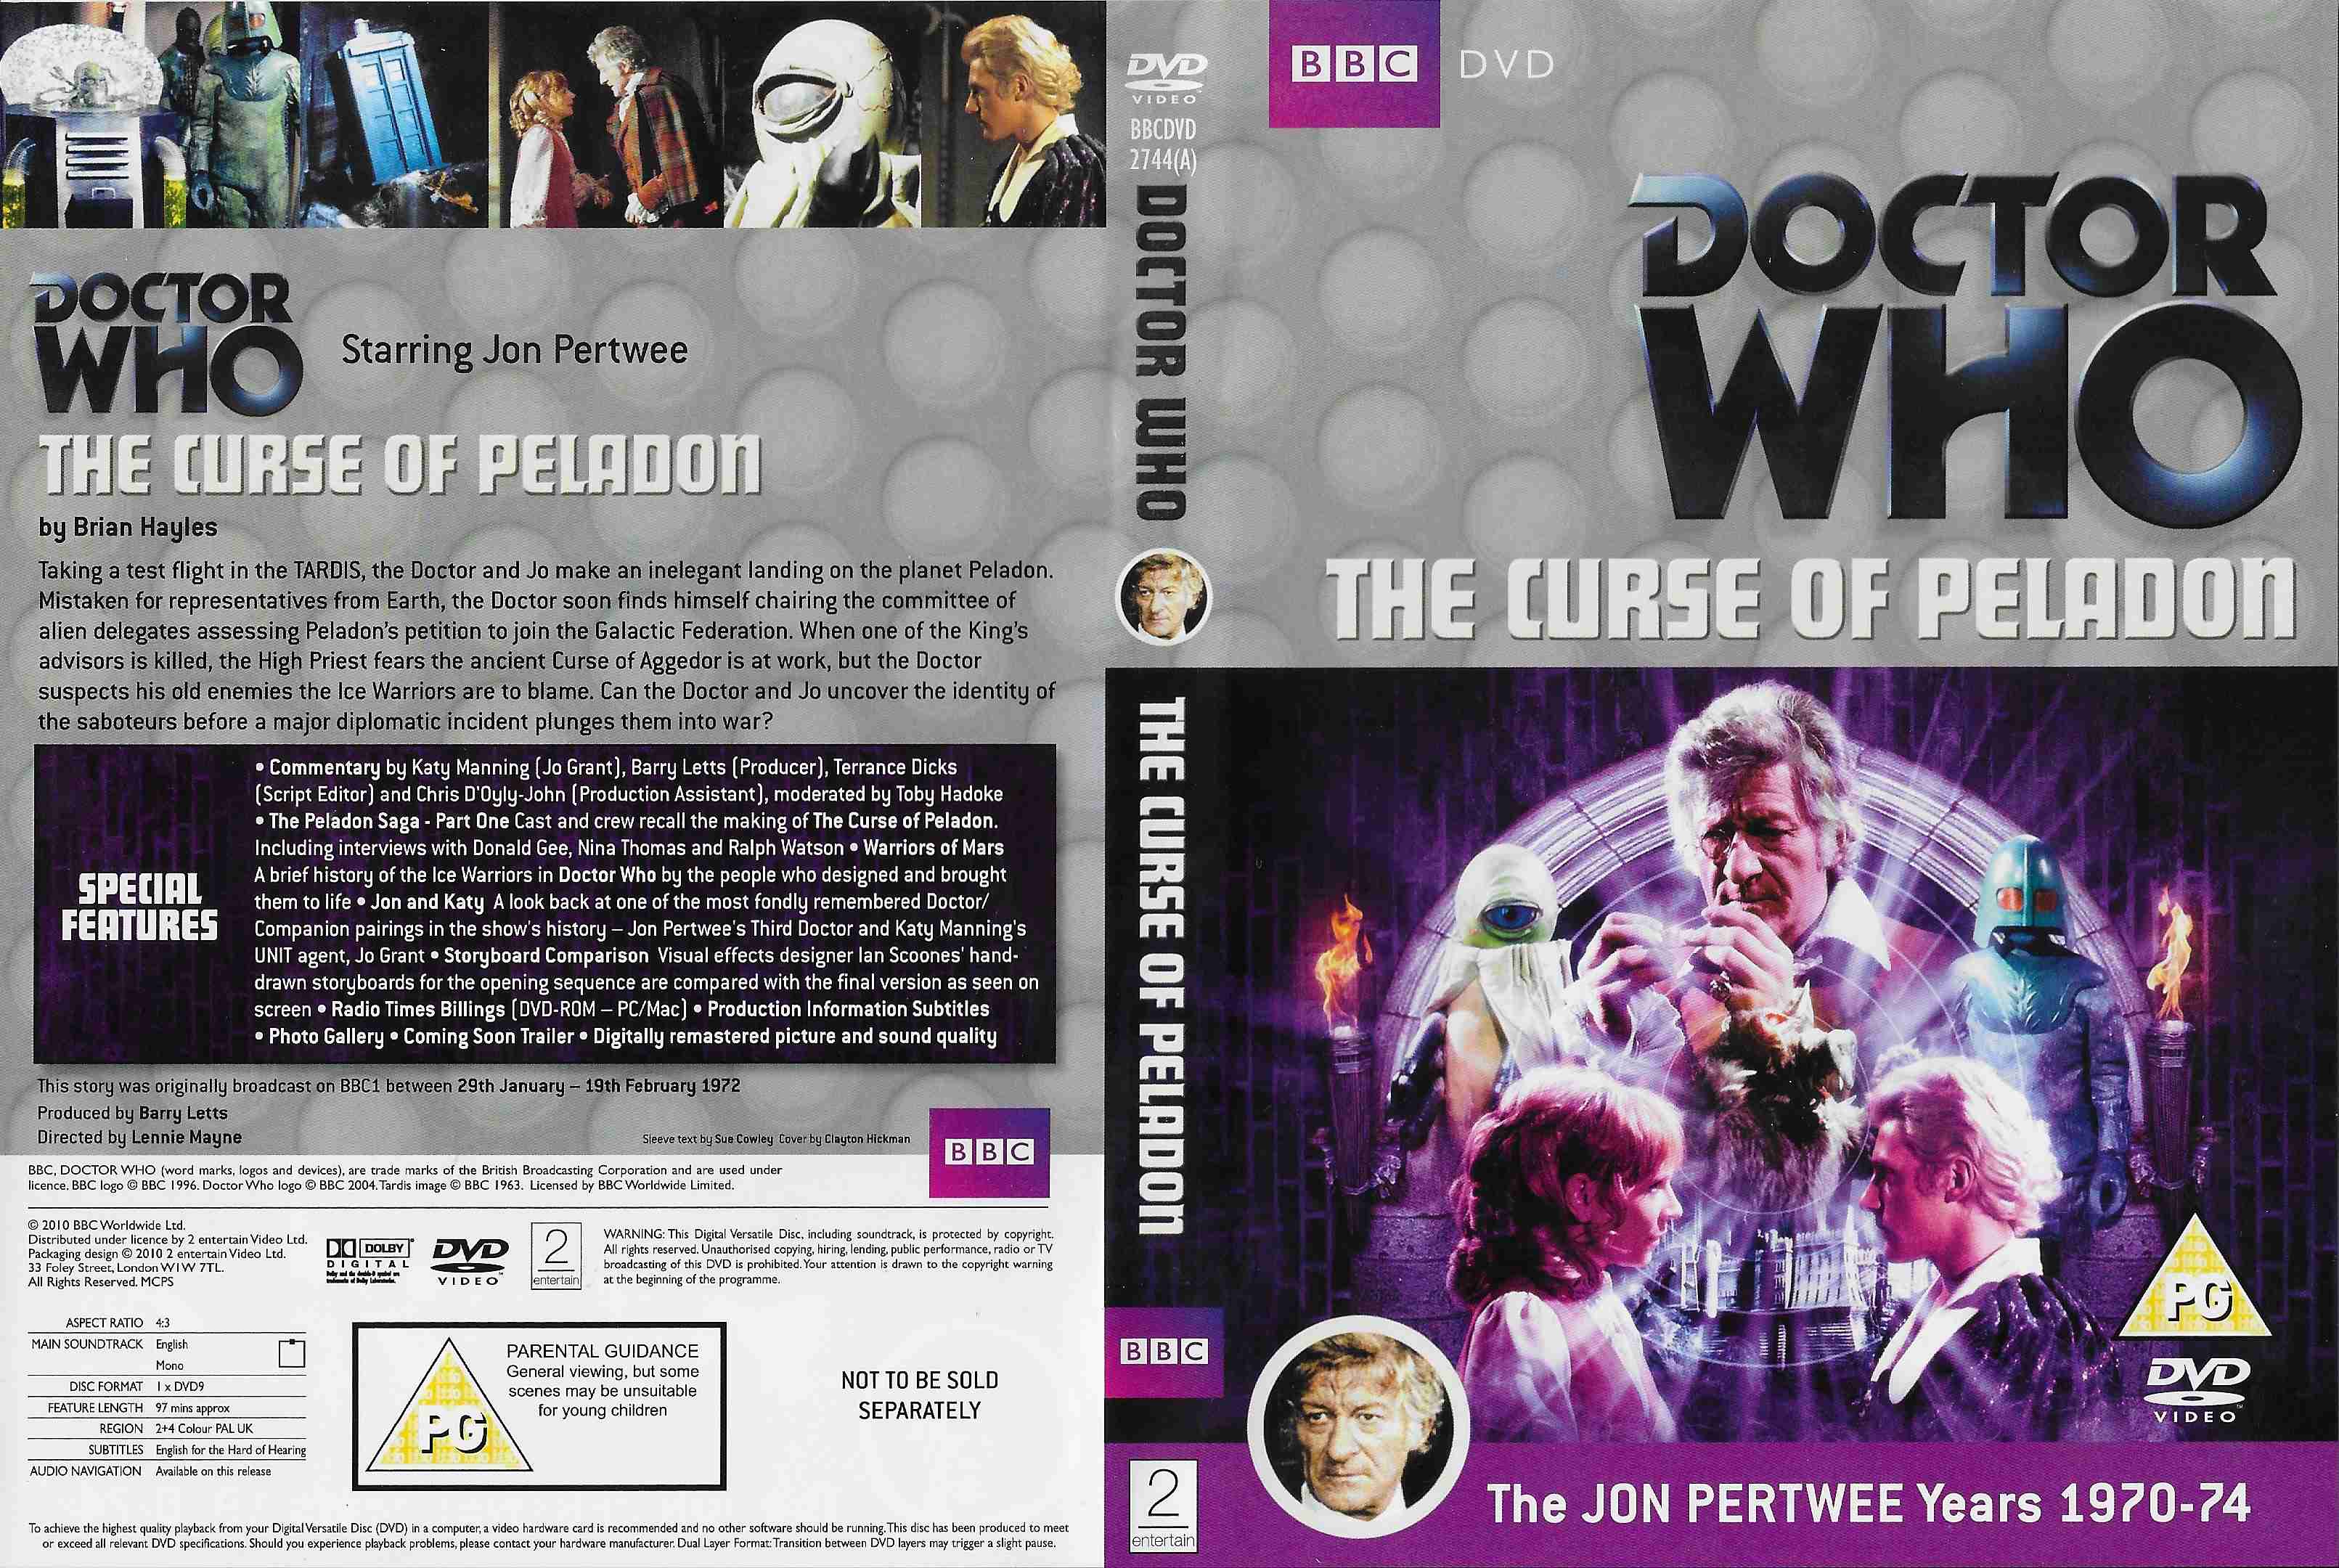 Picture of BBCDVD 2744A Doctor Who - The Curse of Peladon by artist Robert Holmes from the BBC records and Tapes library